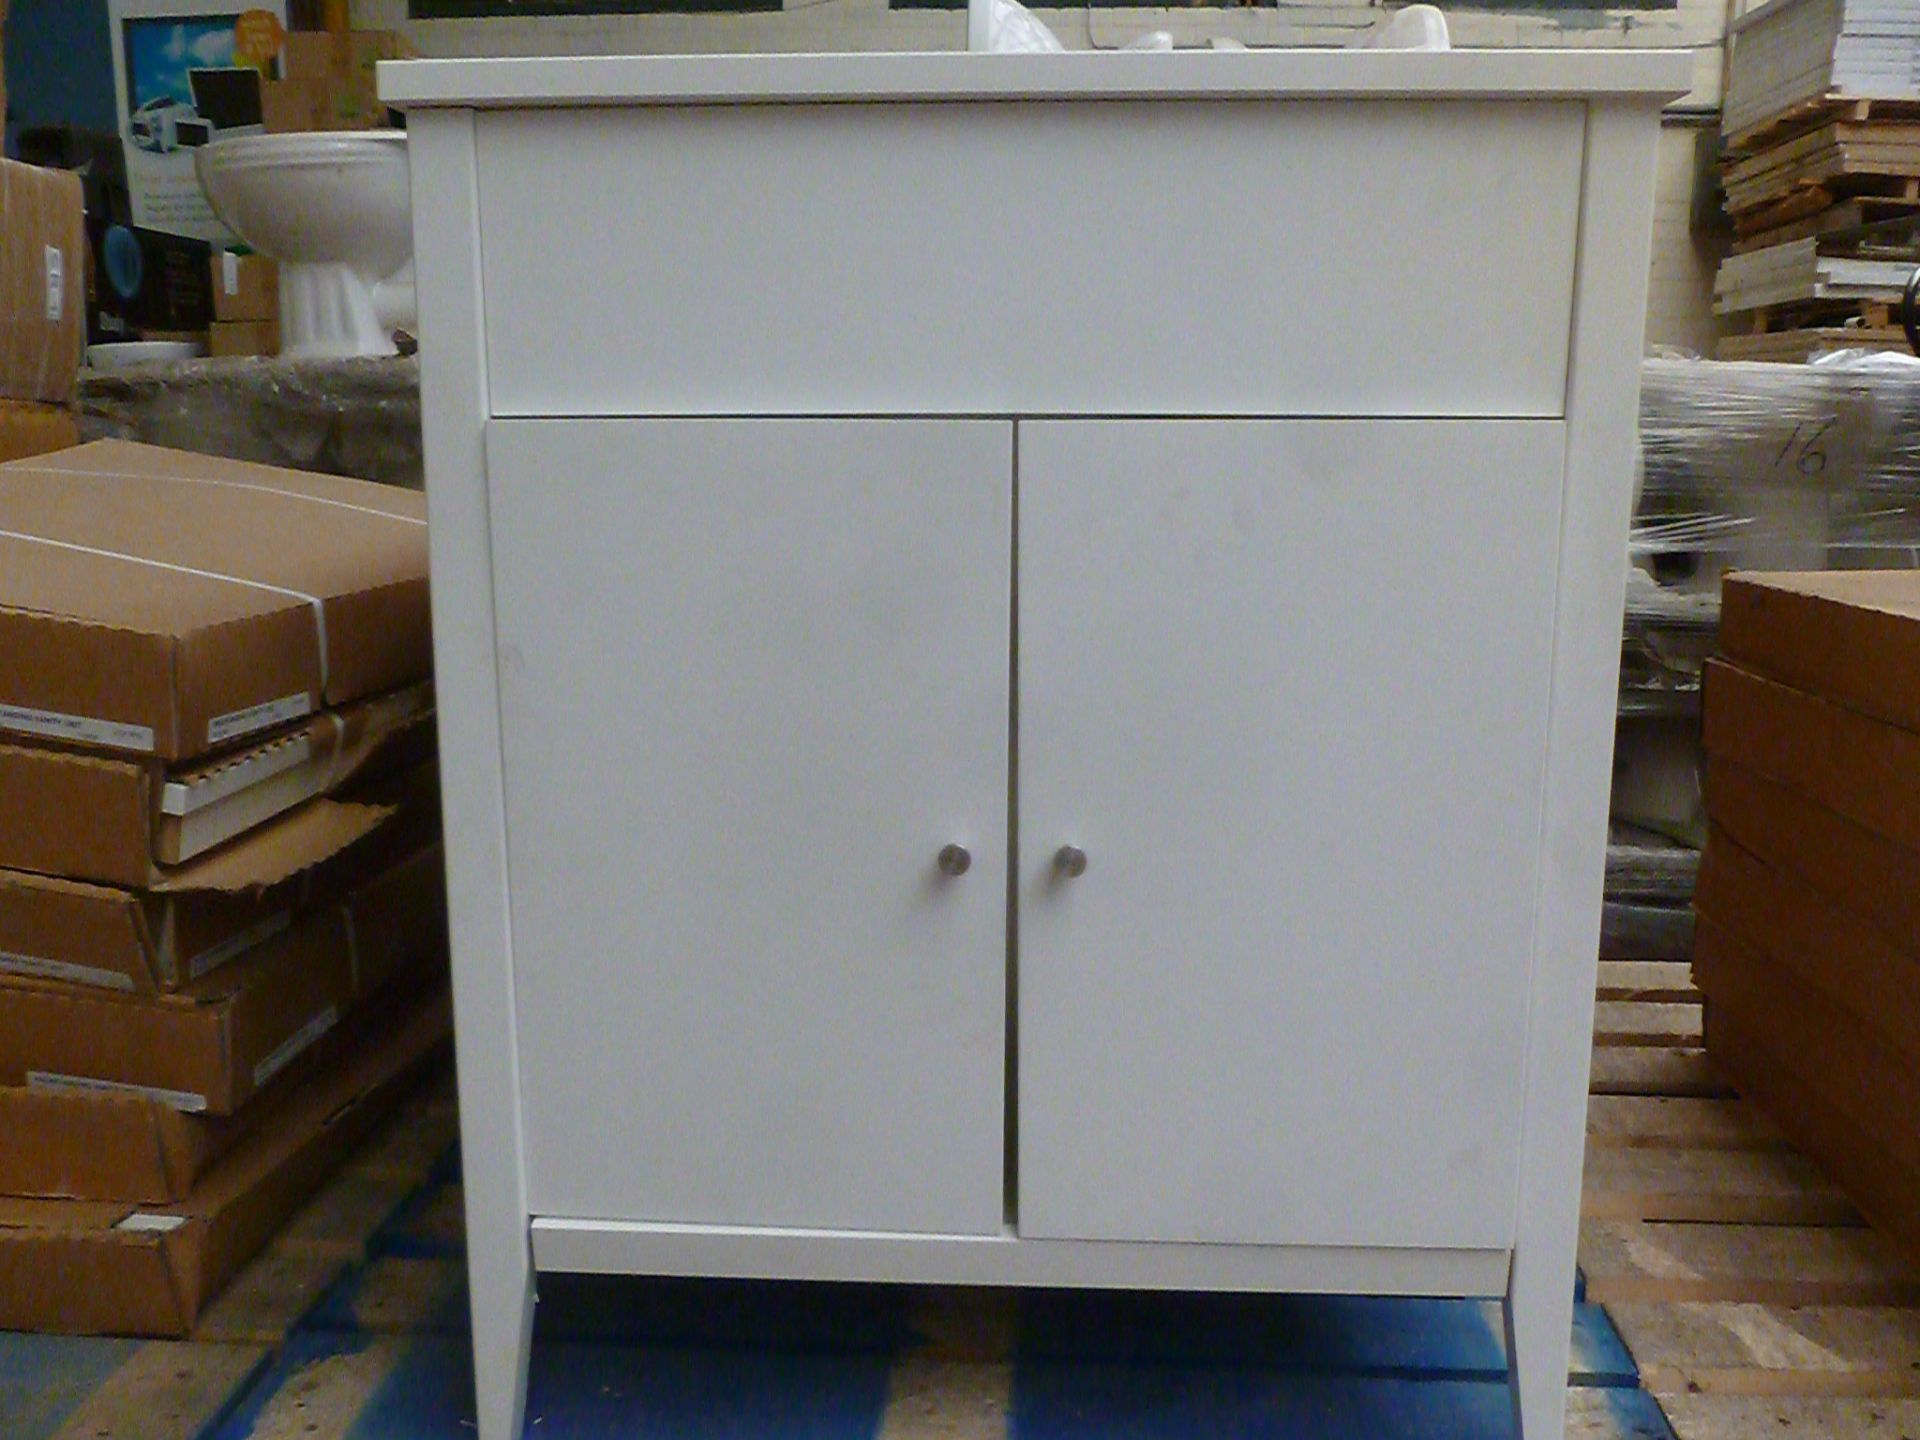 Lica Freestanding White Vanity Unit. 88 x 72 x 37 cm. New and boxed. This item is flat packed.